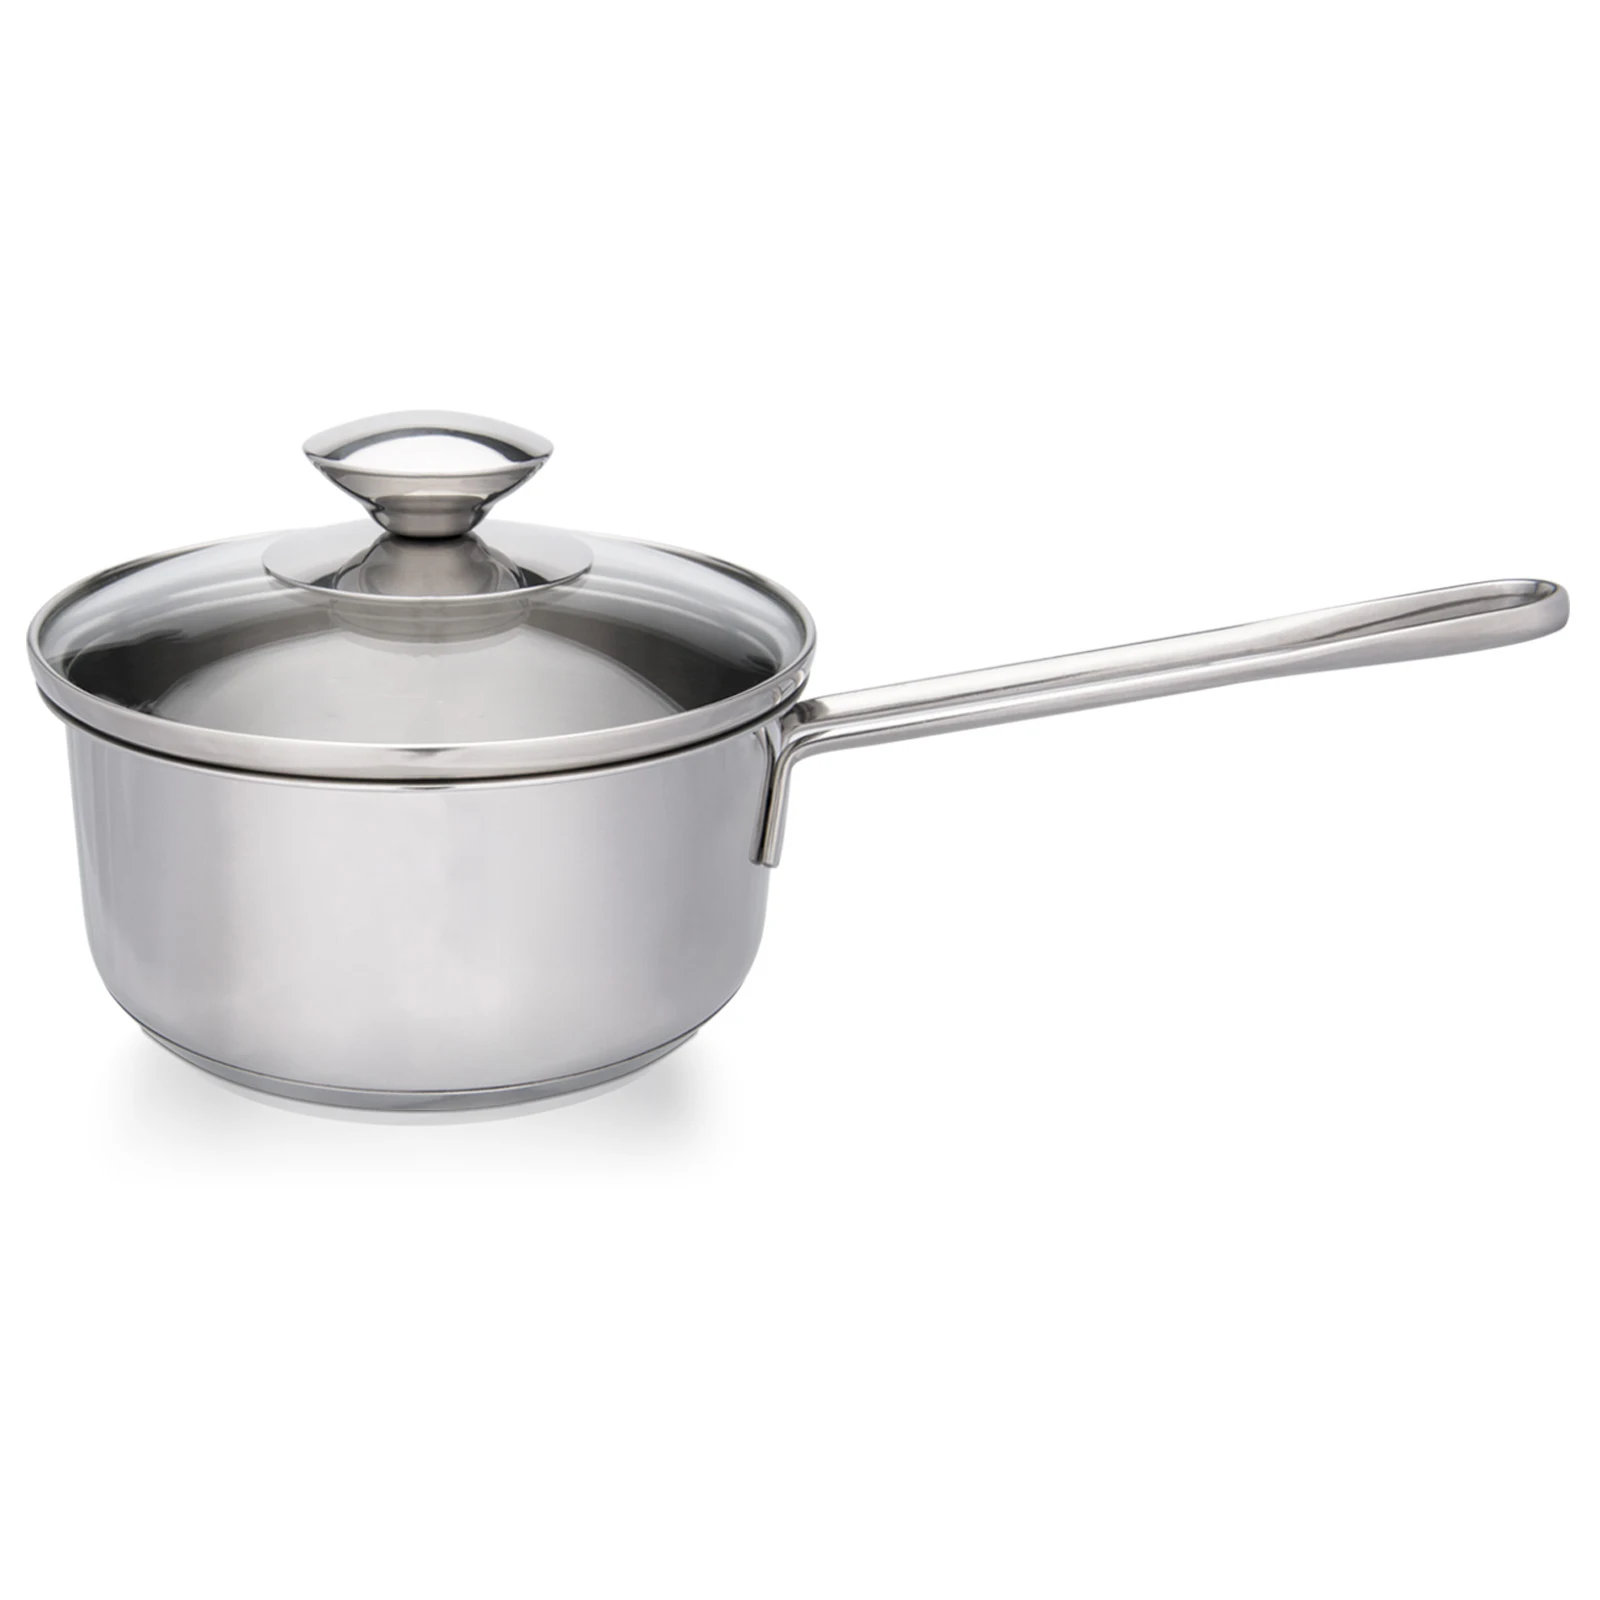 Milk Pan With Glass Lid 14CM 0.9L Kitchen Cooking Small Stainless Steel Soup Stock Pot General Use for Gas and Induction Cooke